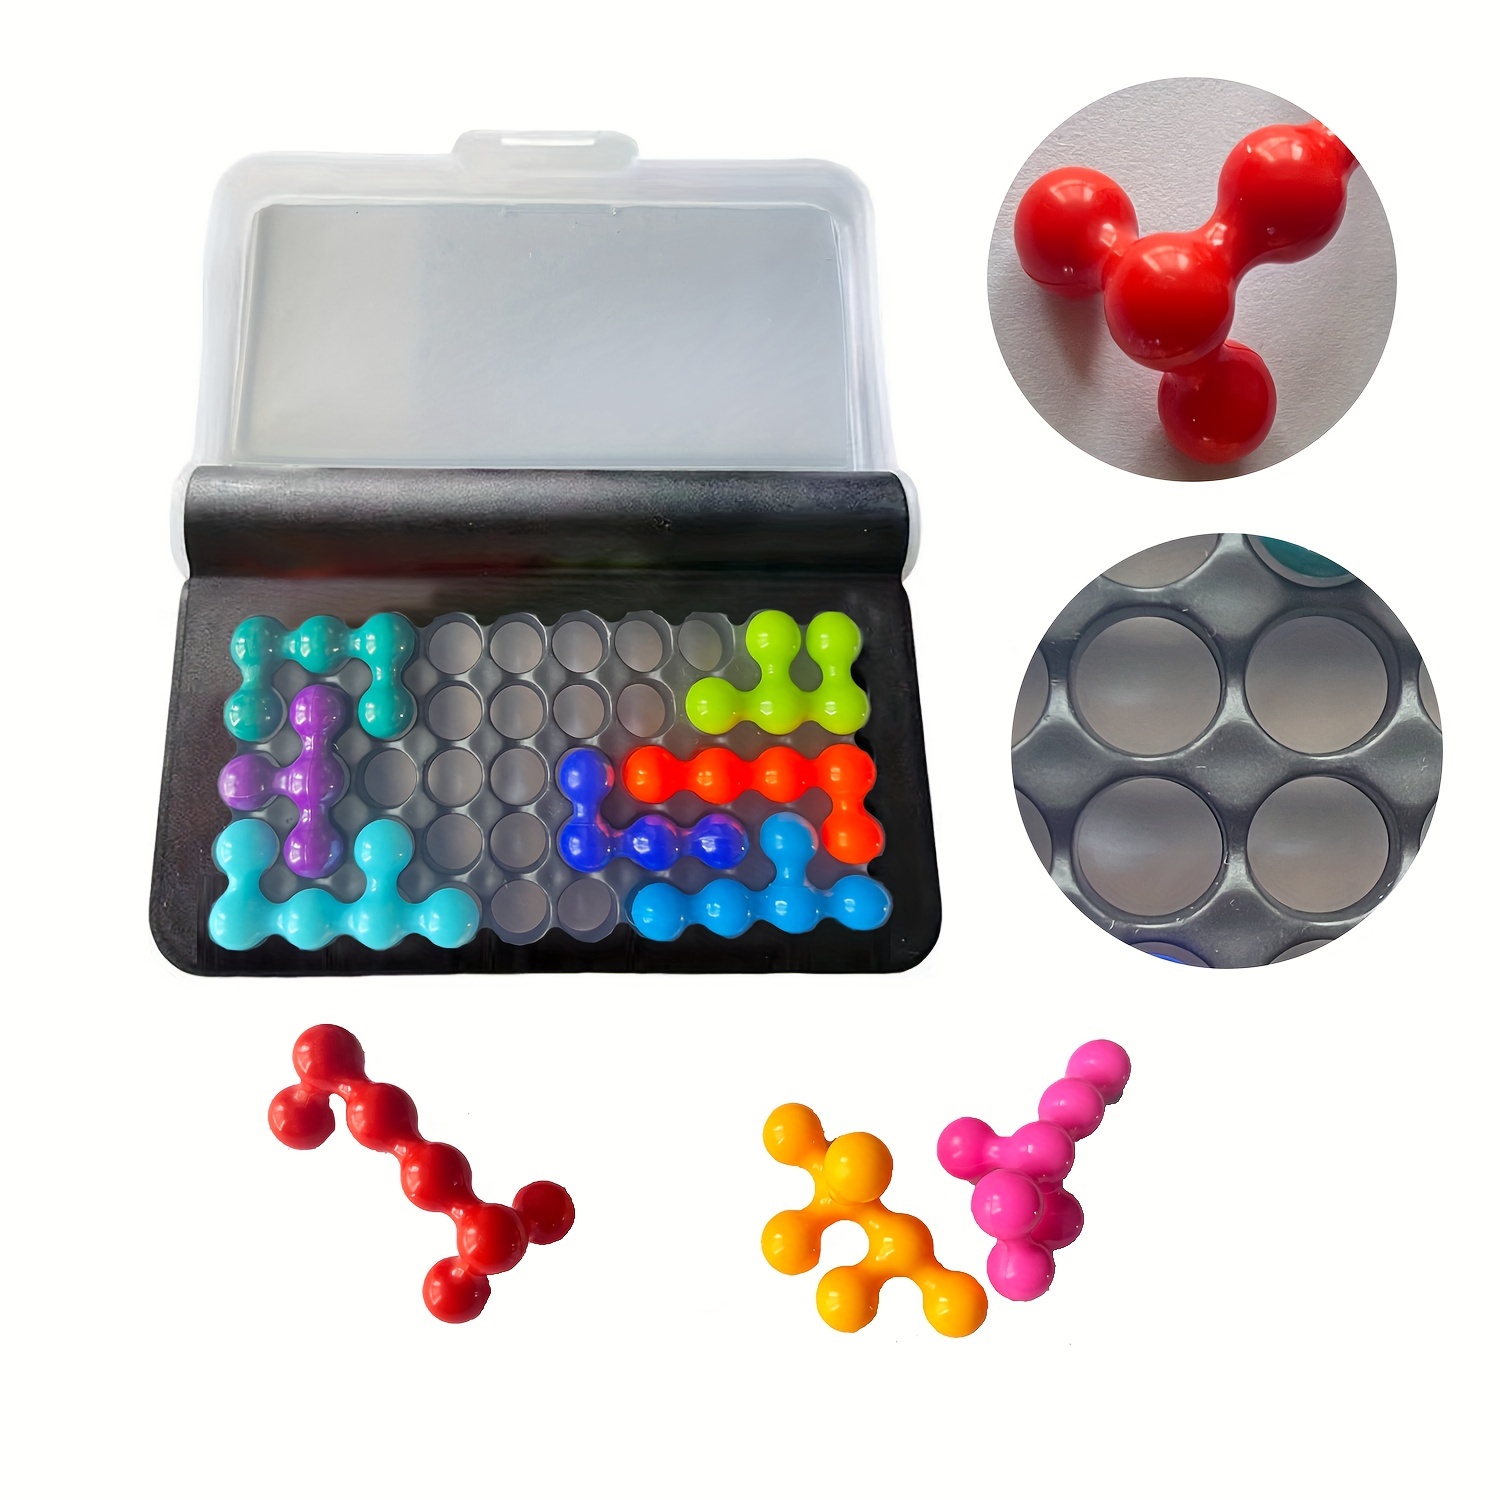 

Brain-boosting 3d Puzzle Stacking Game - Portable Travel Edition With 120 Levels, Colorful Beads & Hollow Chassis Design For Young Players